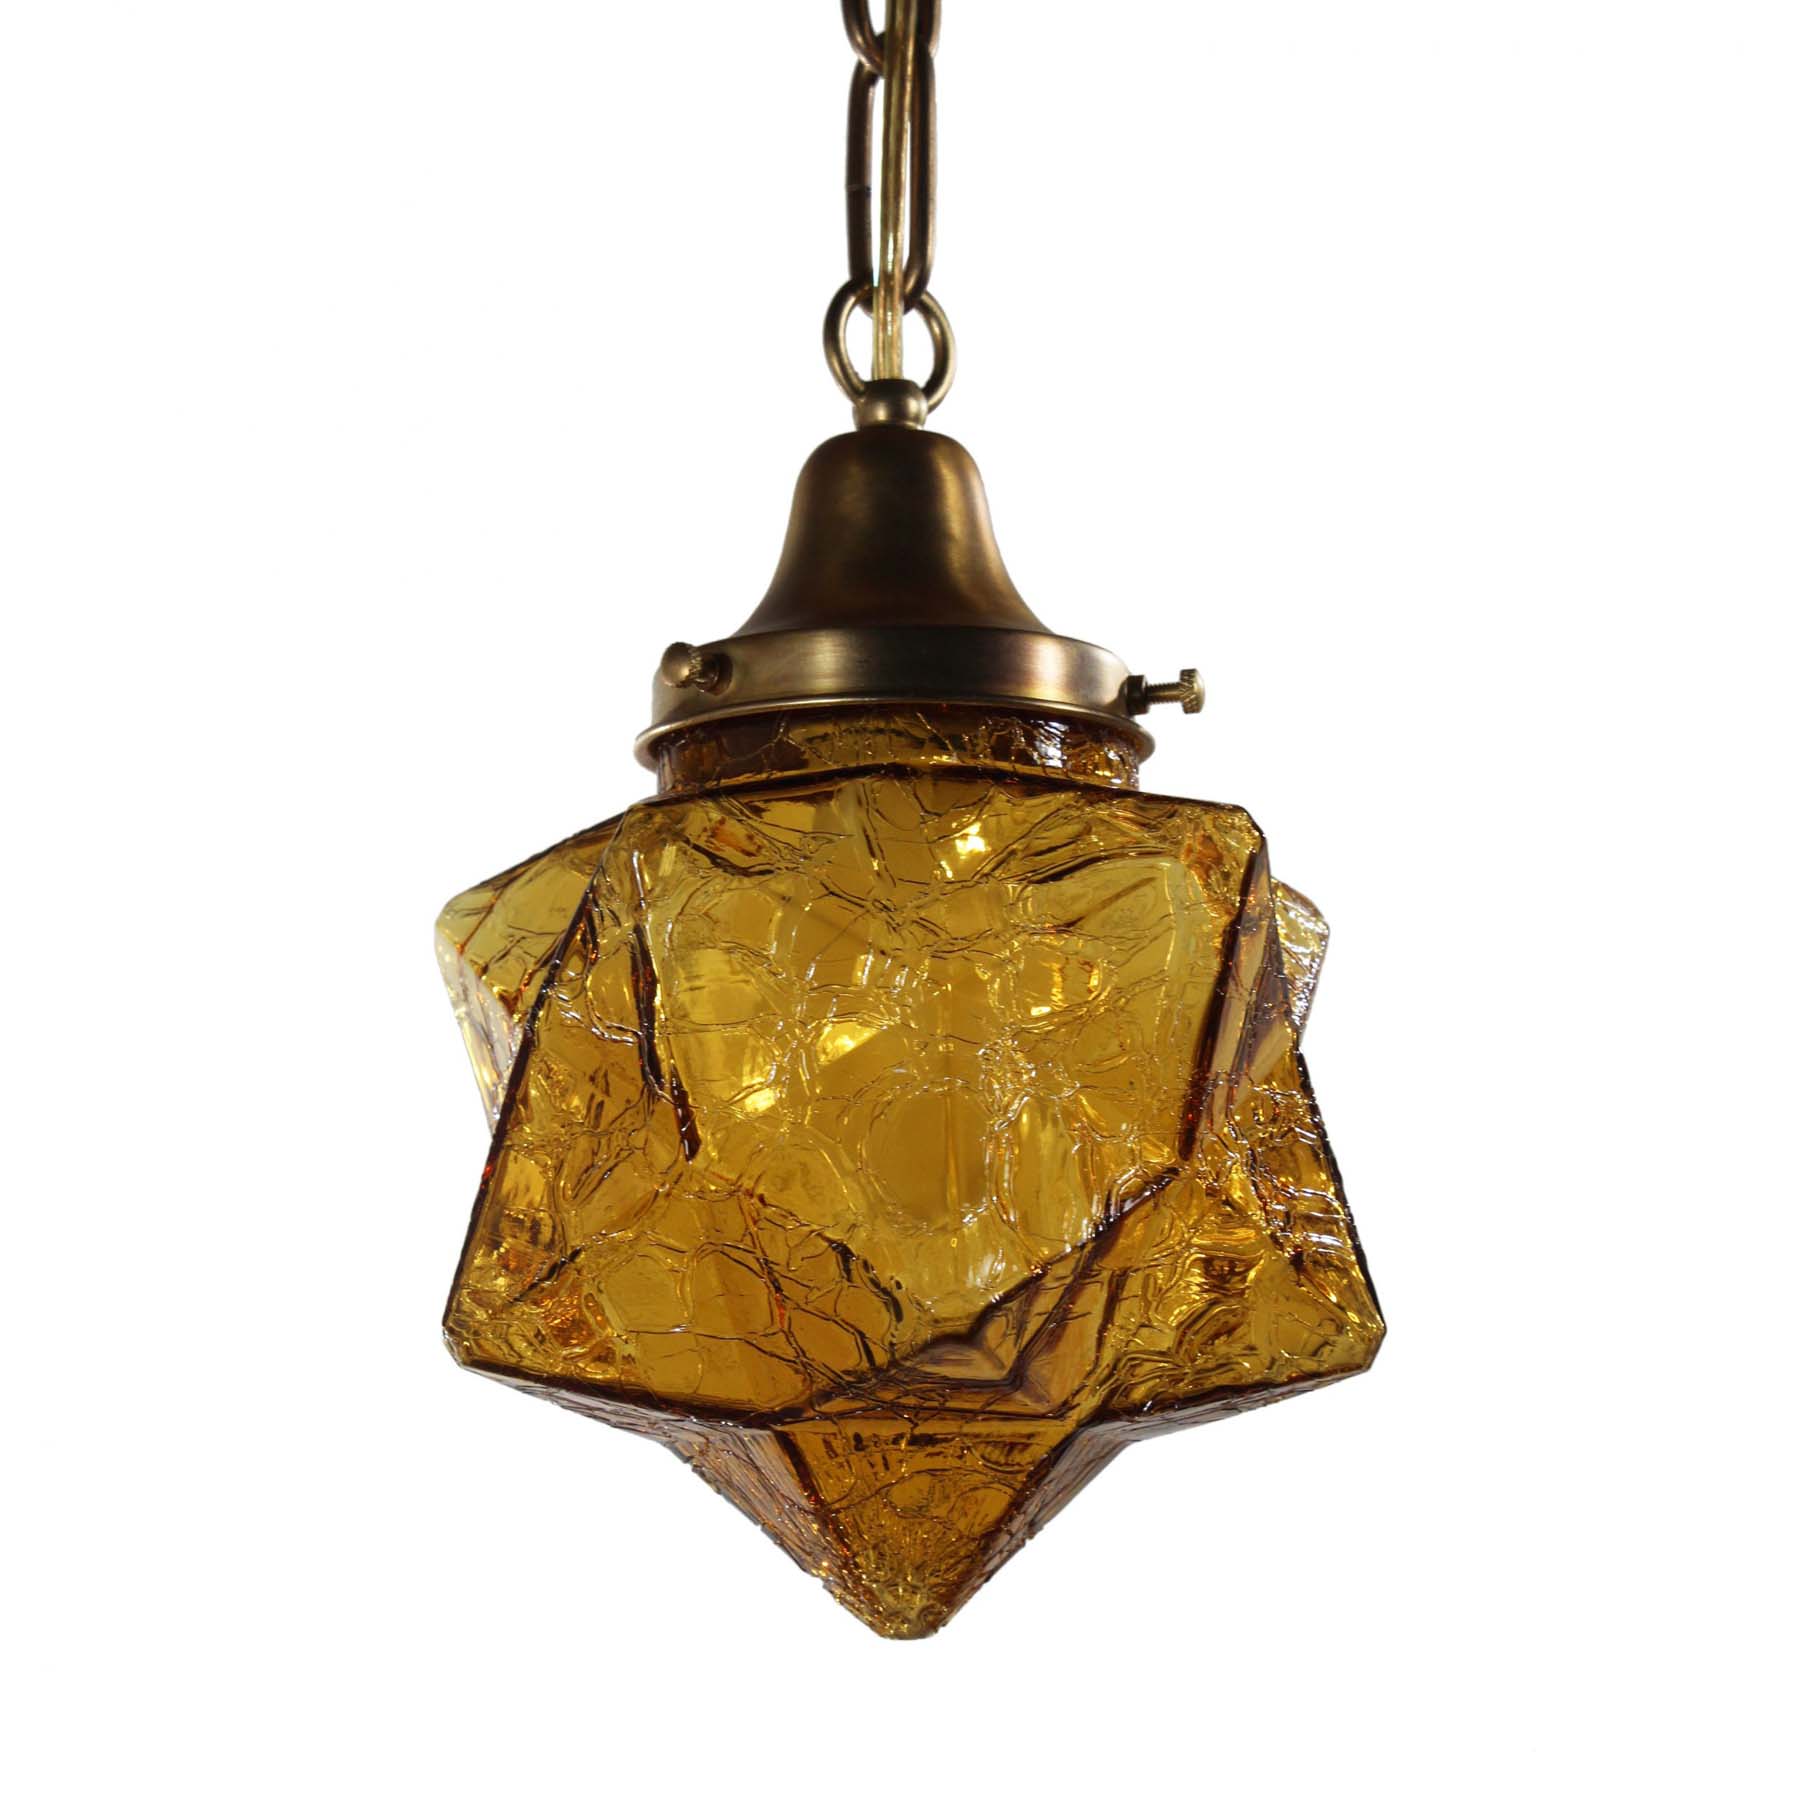 SOLD Pendant Light with Amber Crackle Glass, Antique Lighting-0